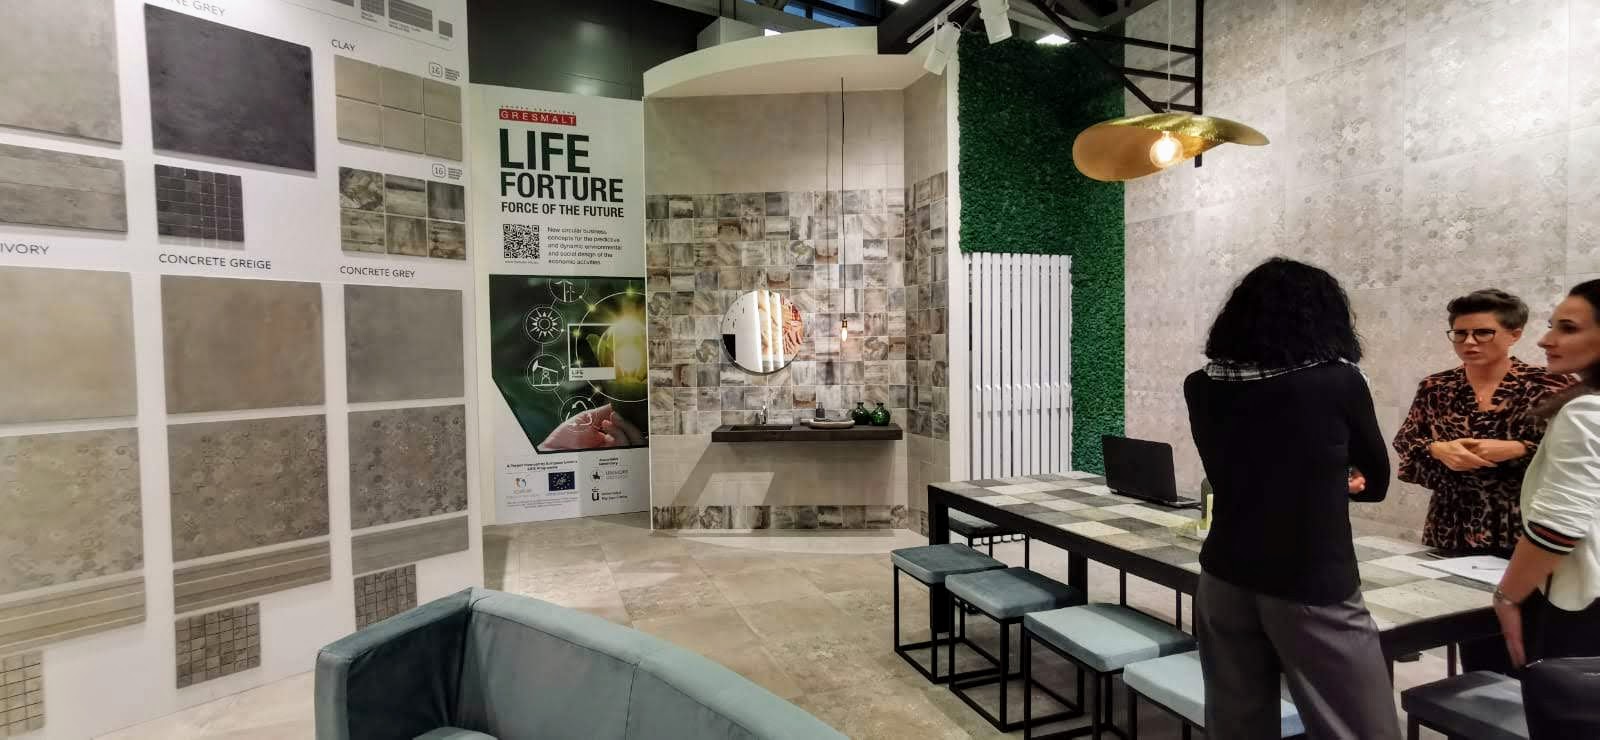 Cersaie 2019 in Bologna